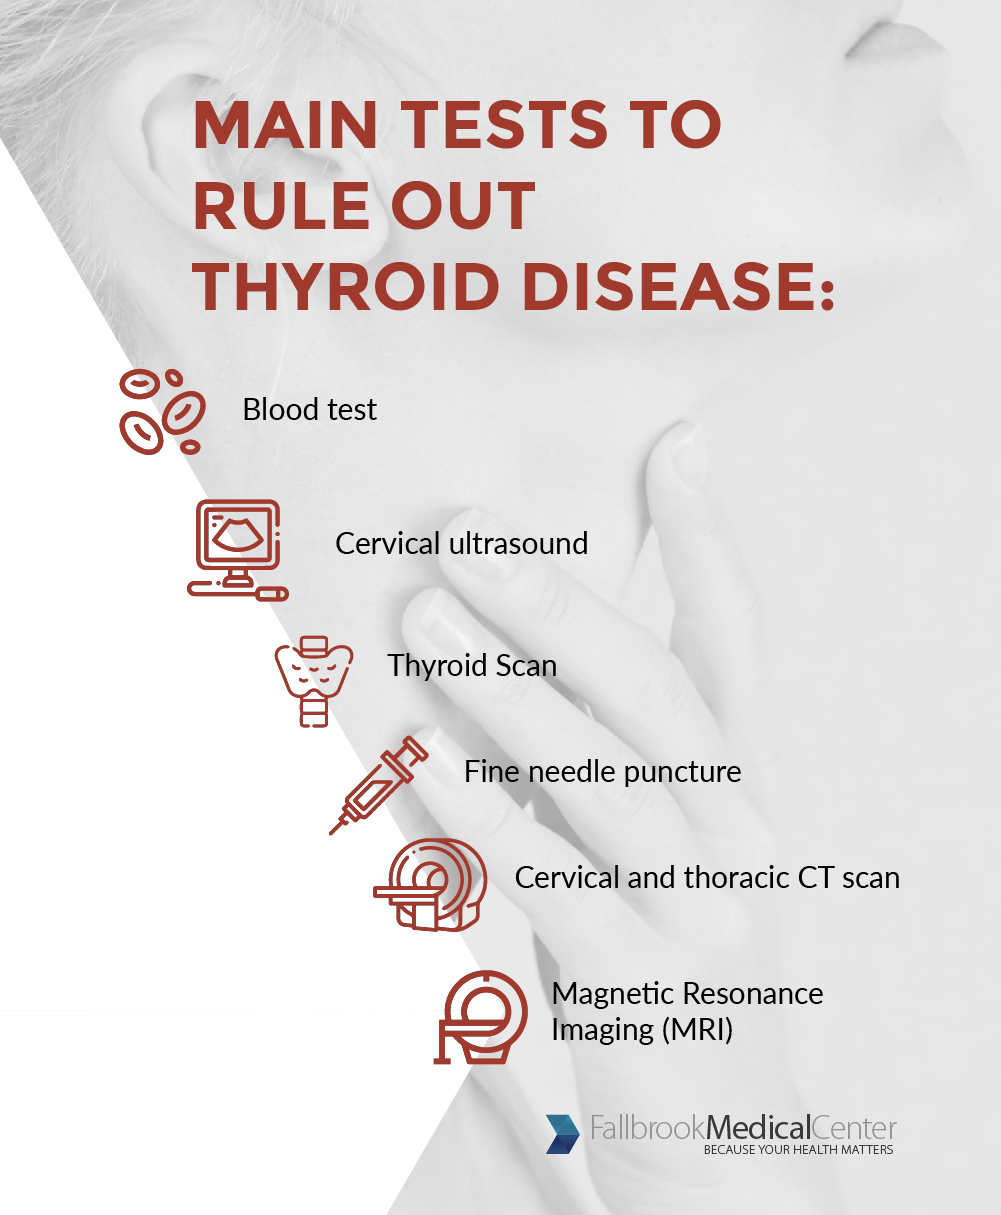 How to diagnose a thyroid problem